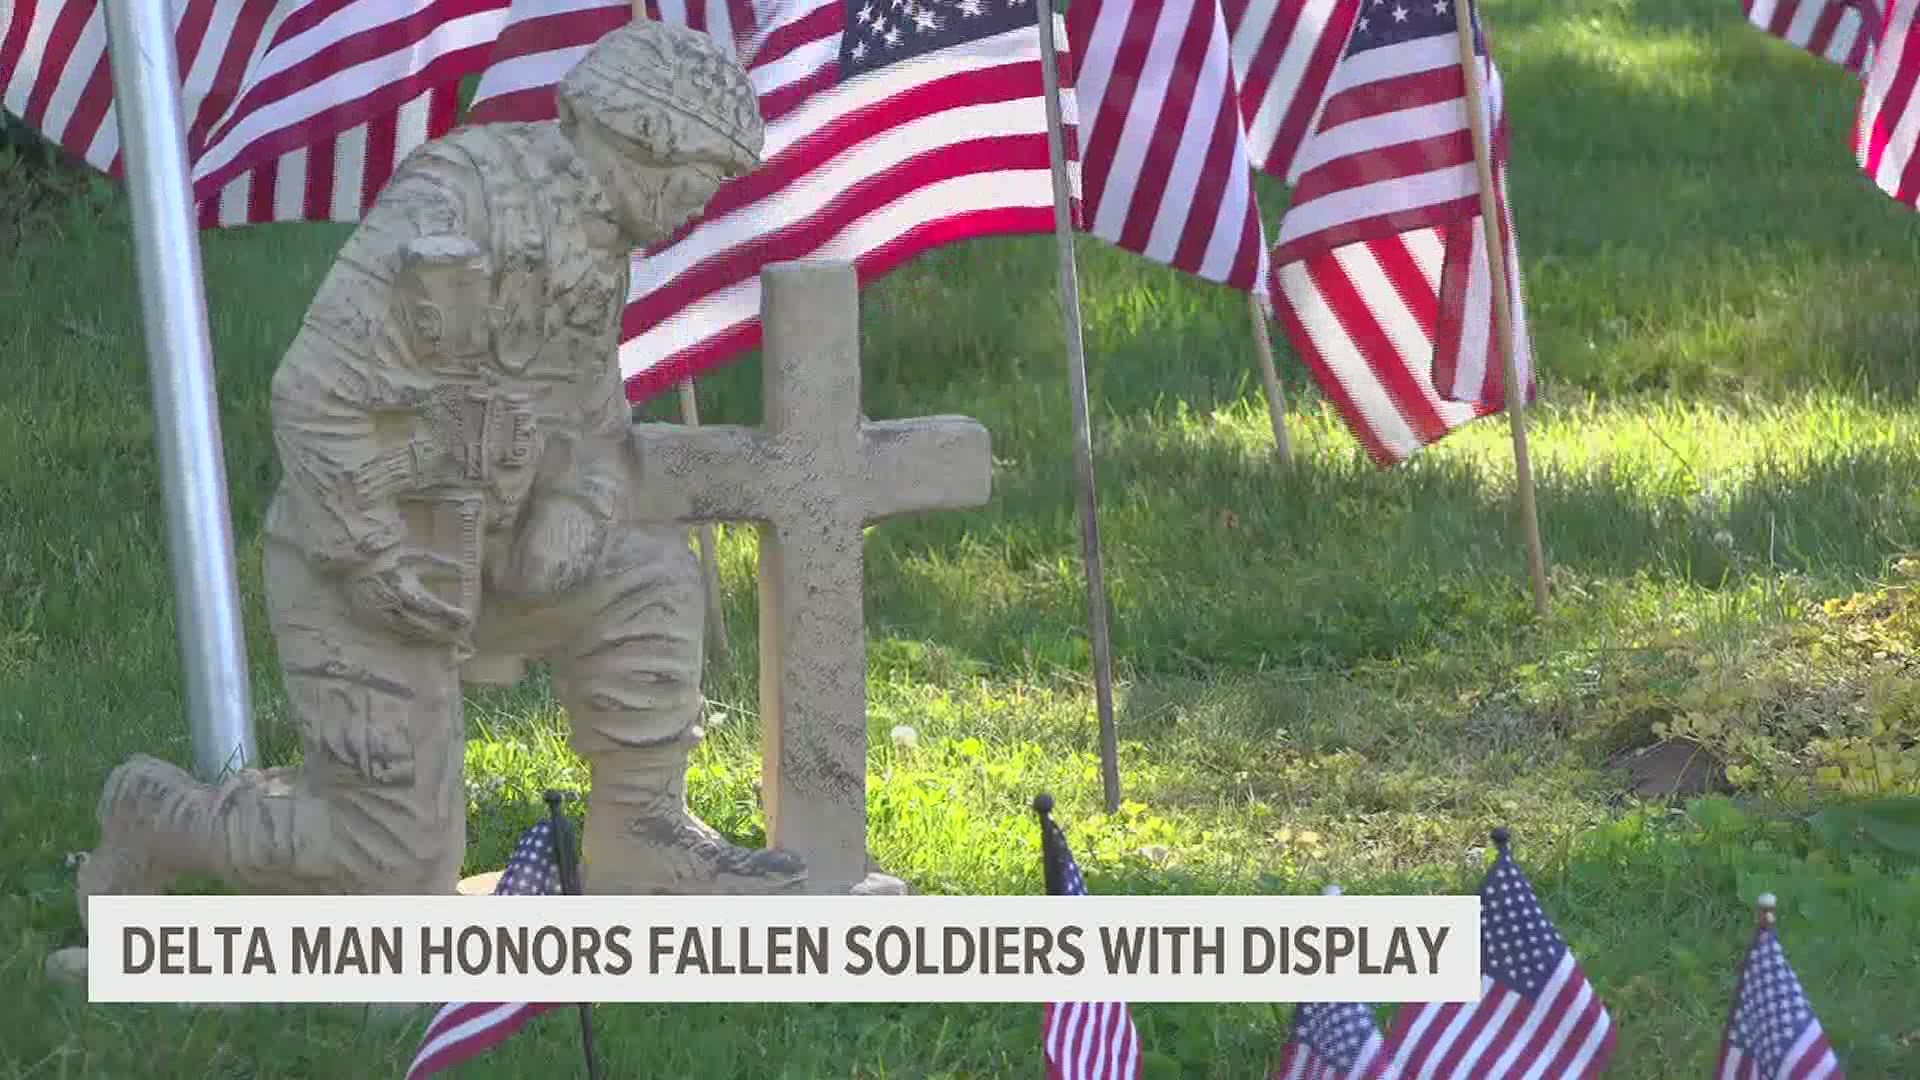 Jerry Barbour started placing flags on the front yard of his home five years ago.